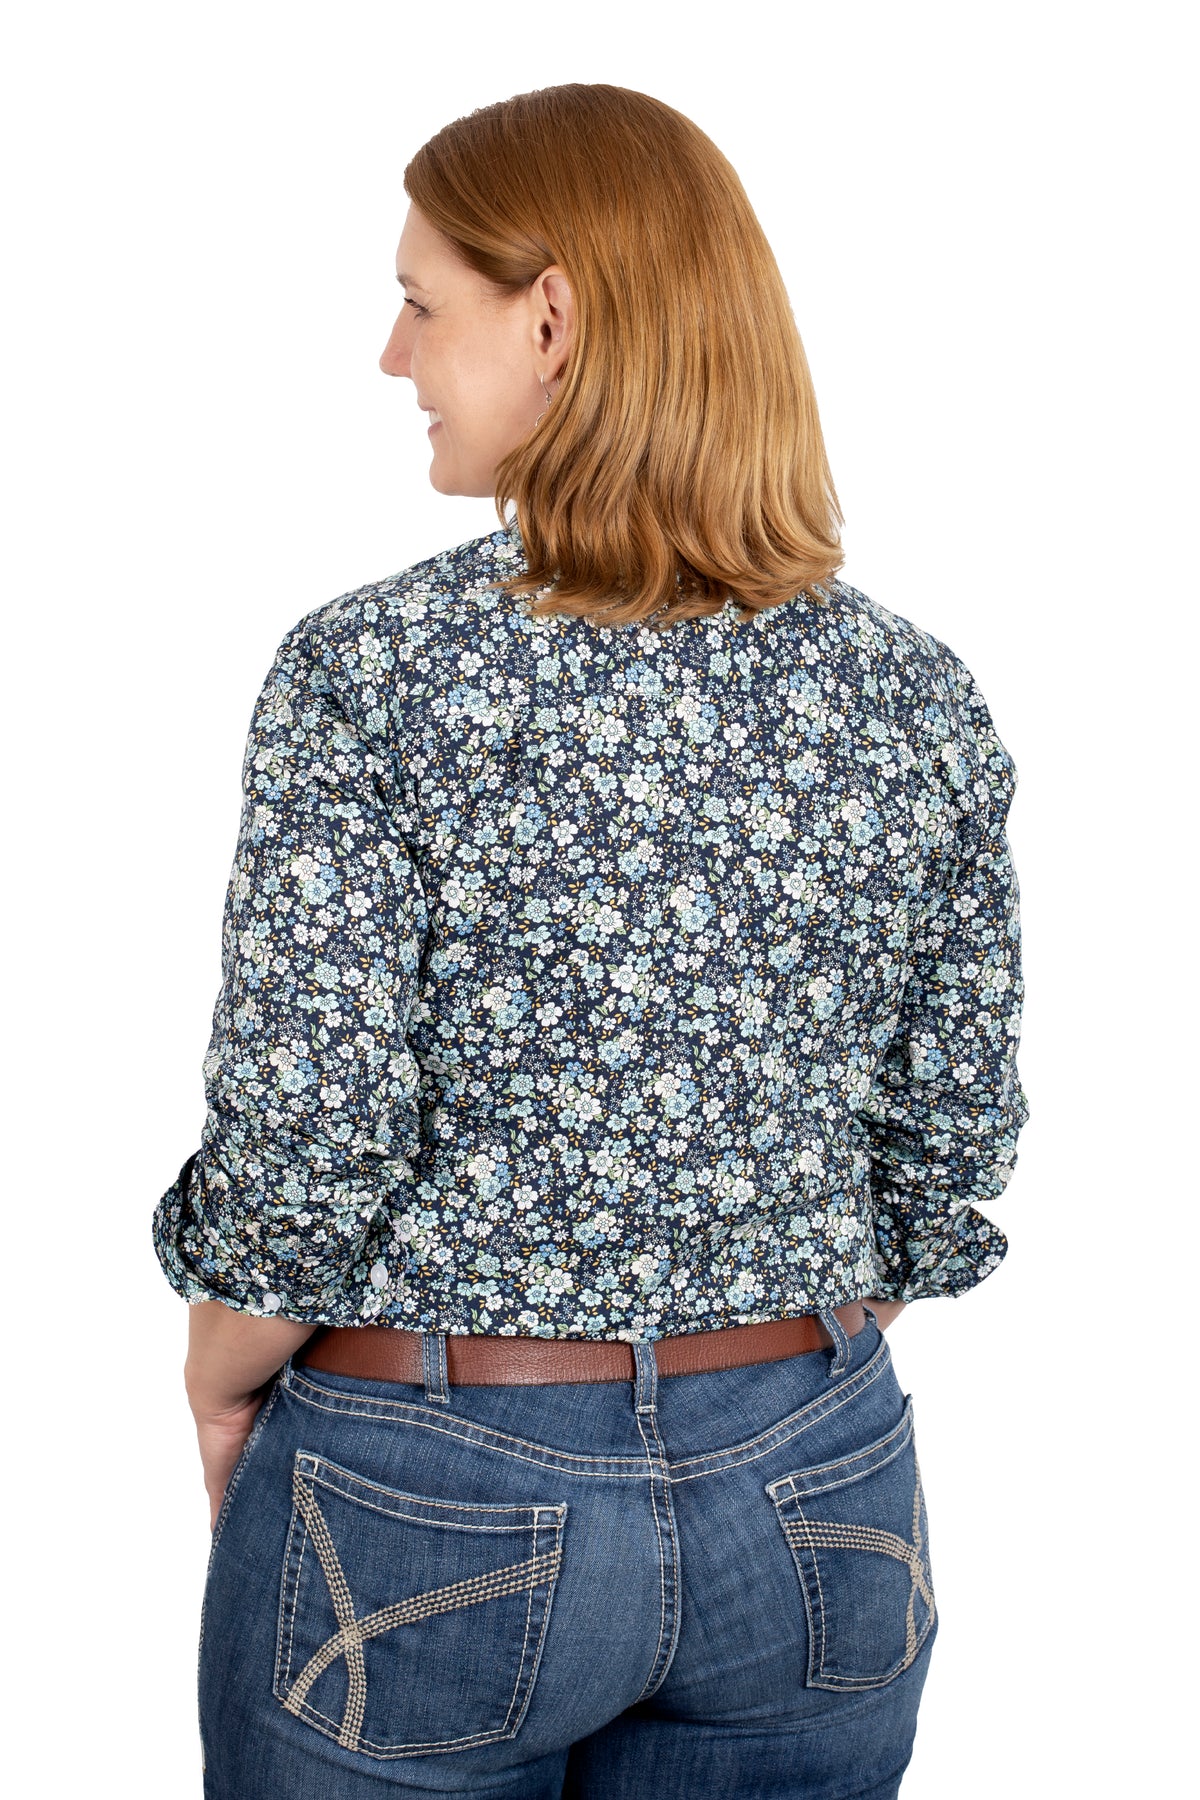 Just Country Womens Abbey Full Button Shirt - Black Mini Floral